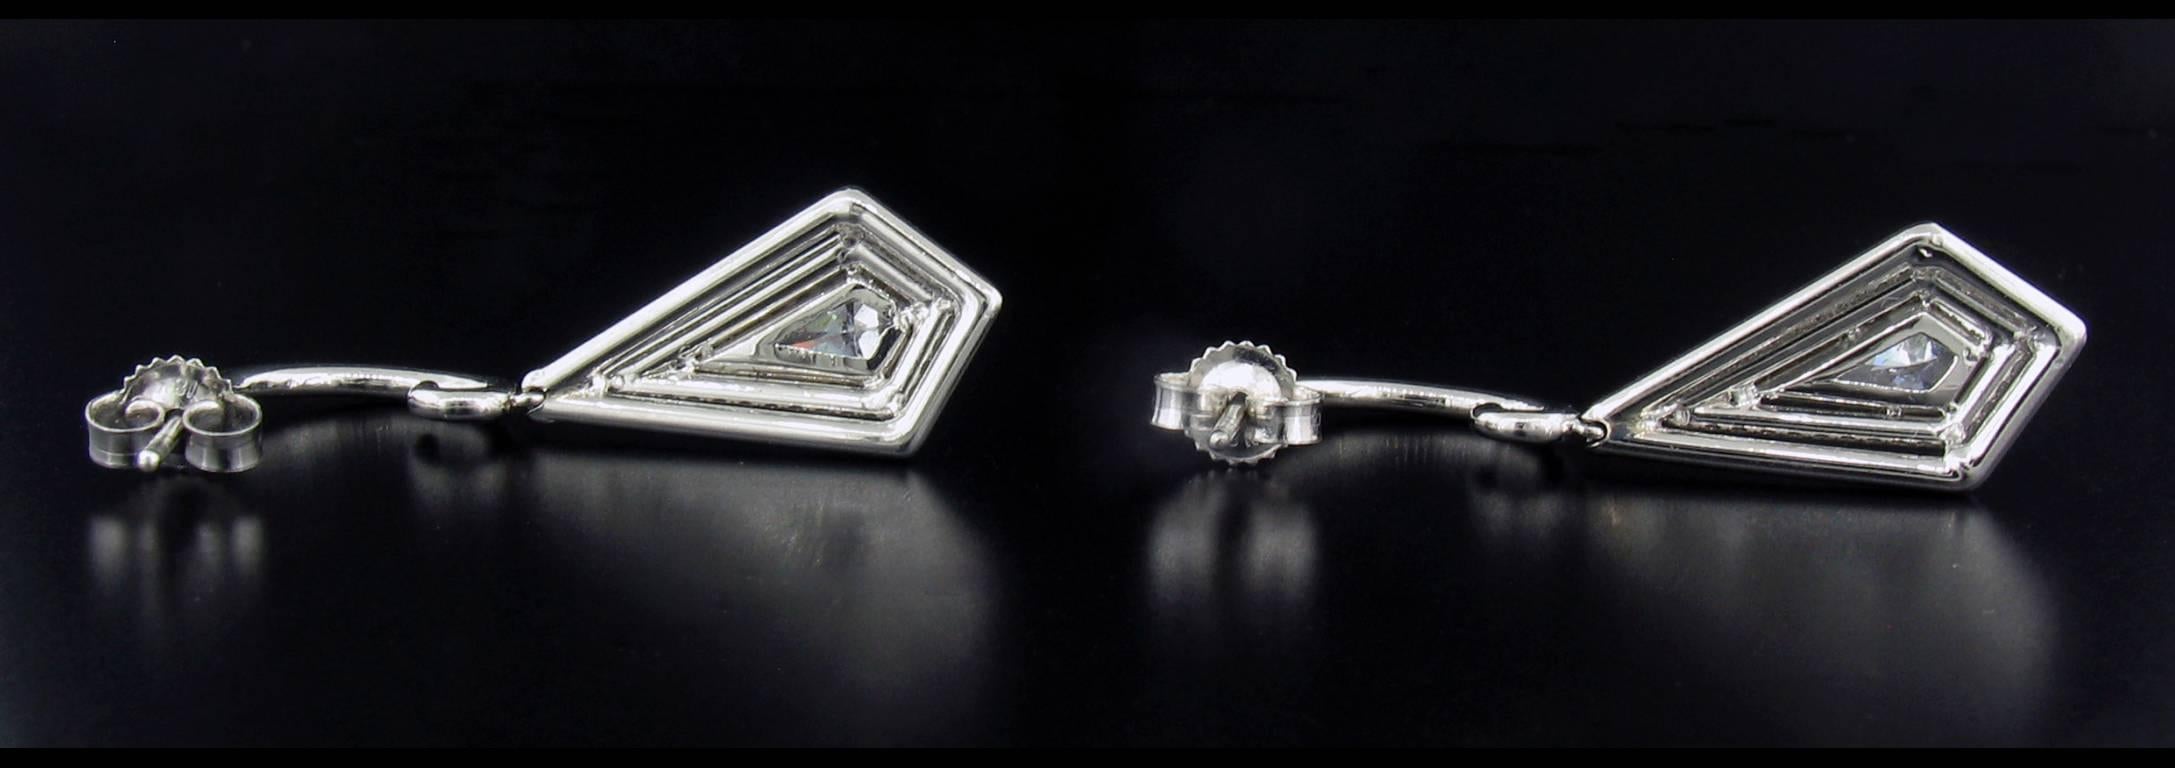 Kite shaped diamonds are unusual to find, especially in earrings! These were made by Michael Barin, Los Angeles.  These are set in platinum with diamond weight totaling 1.66 carats.  (Kites weigh 0.42 carats total, Pave weighs 1.24 carats total.)